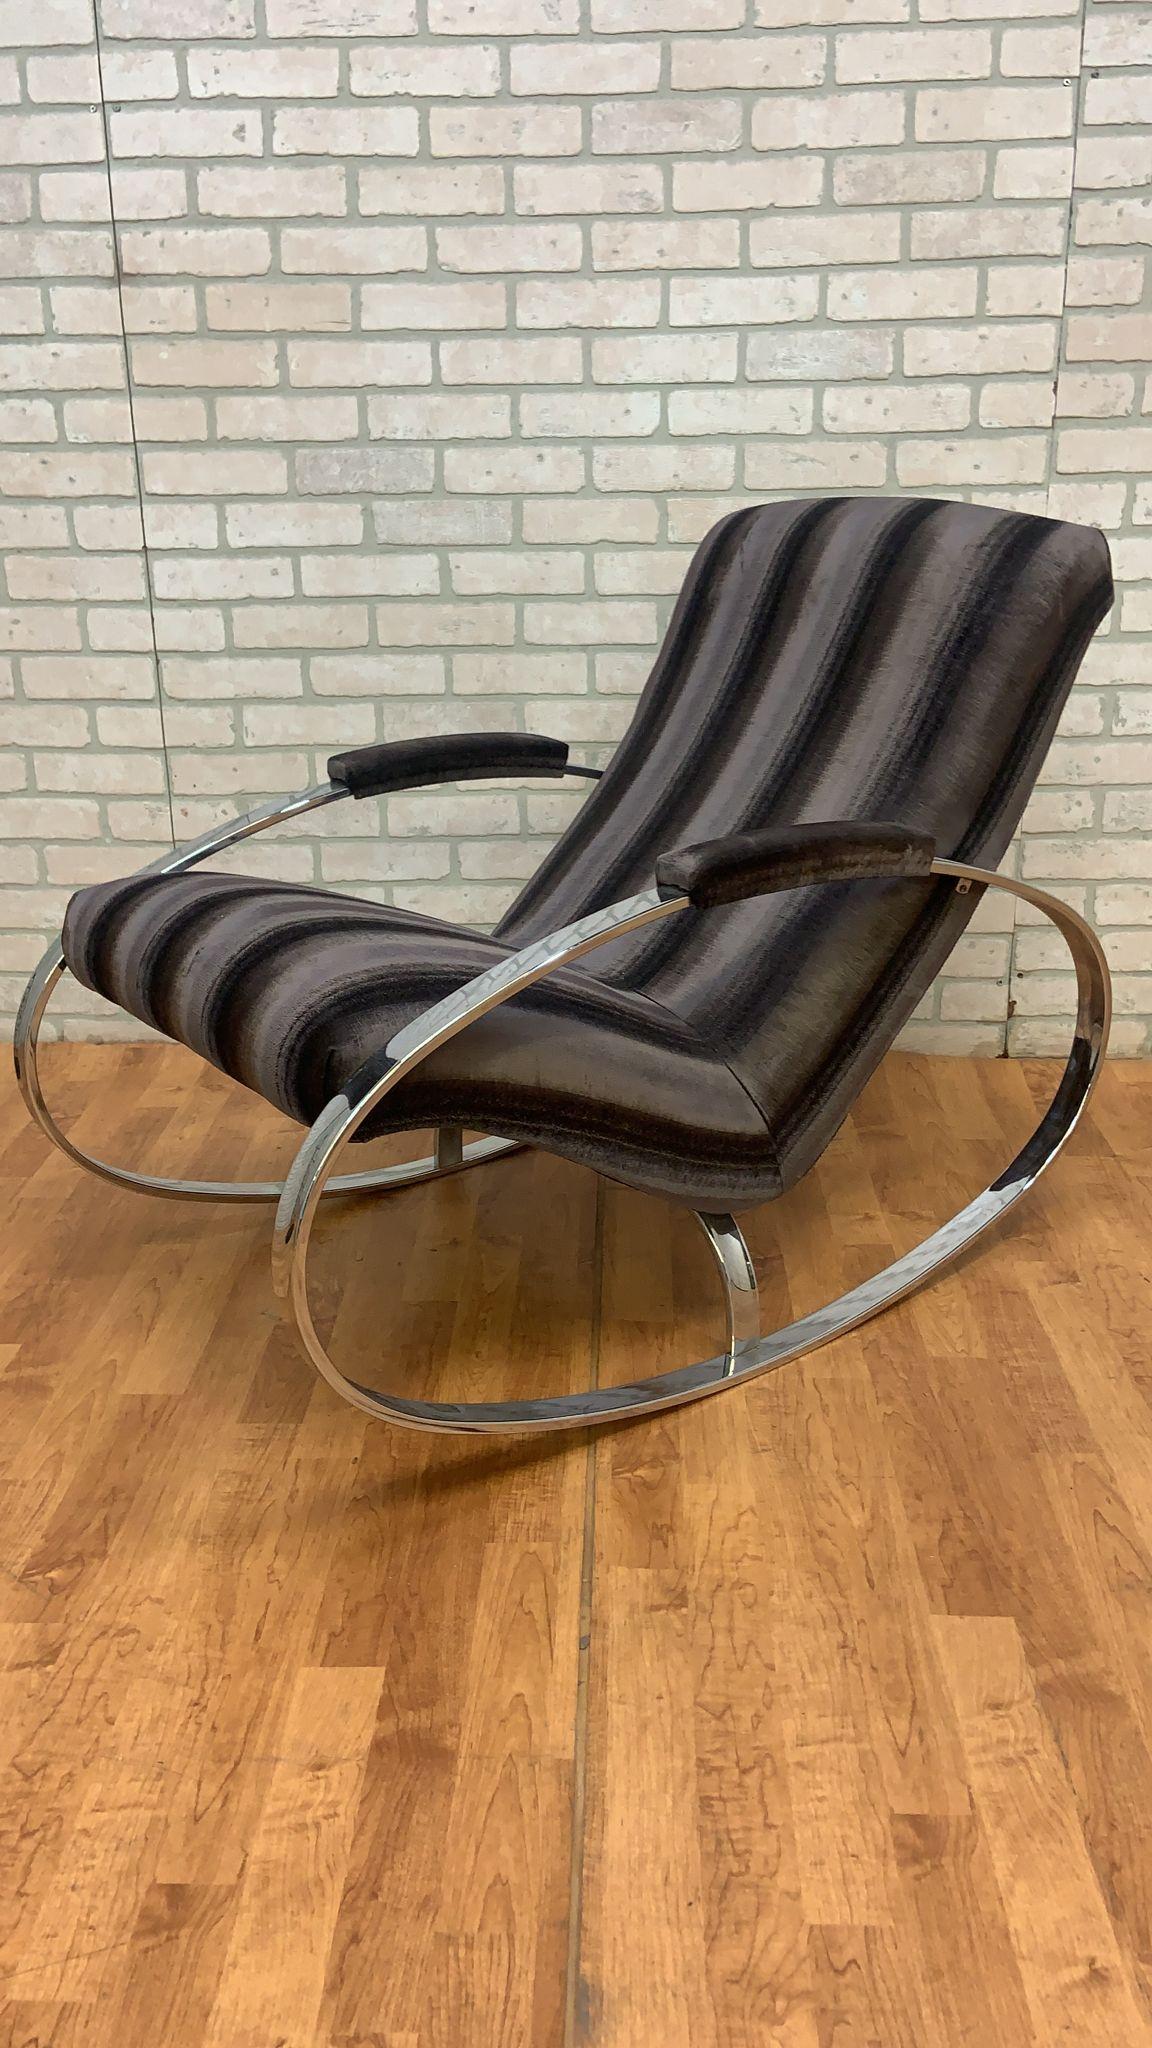 Midcentury Milo Baughman Chrome Flat Bar Oval Rocking Chair Newly Upholstered For Sale 1